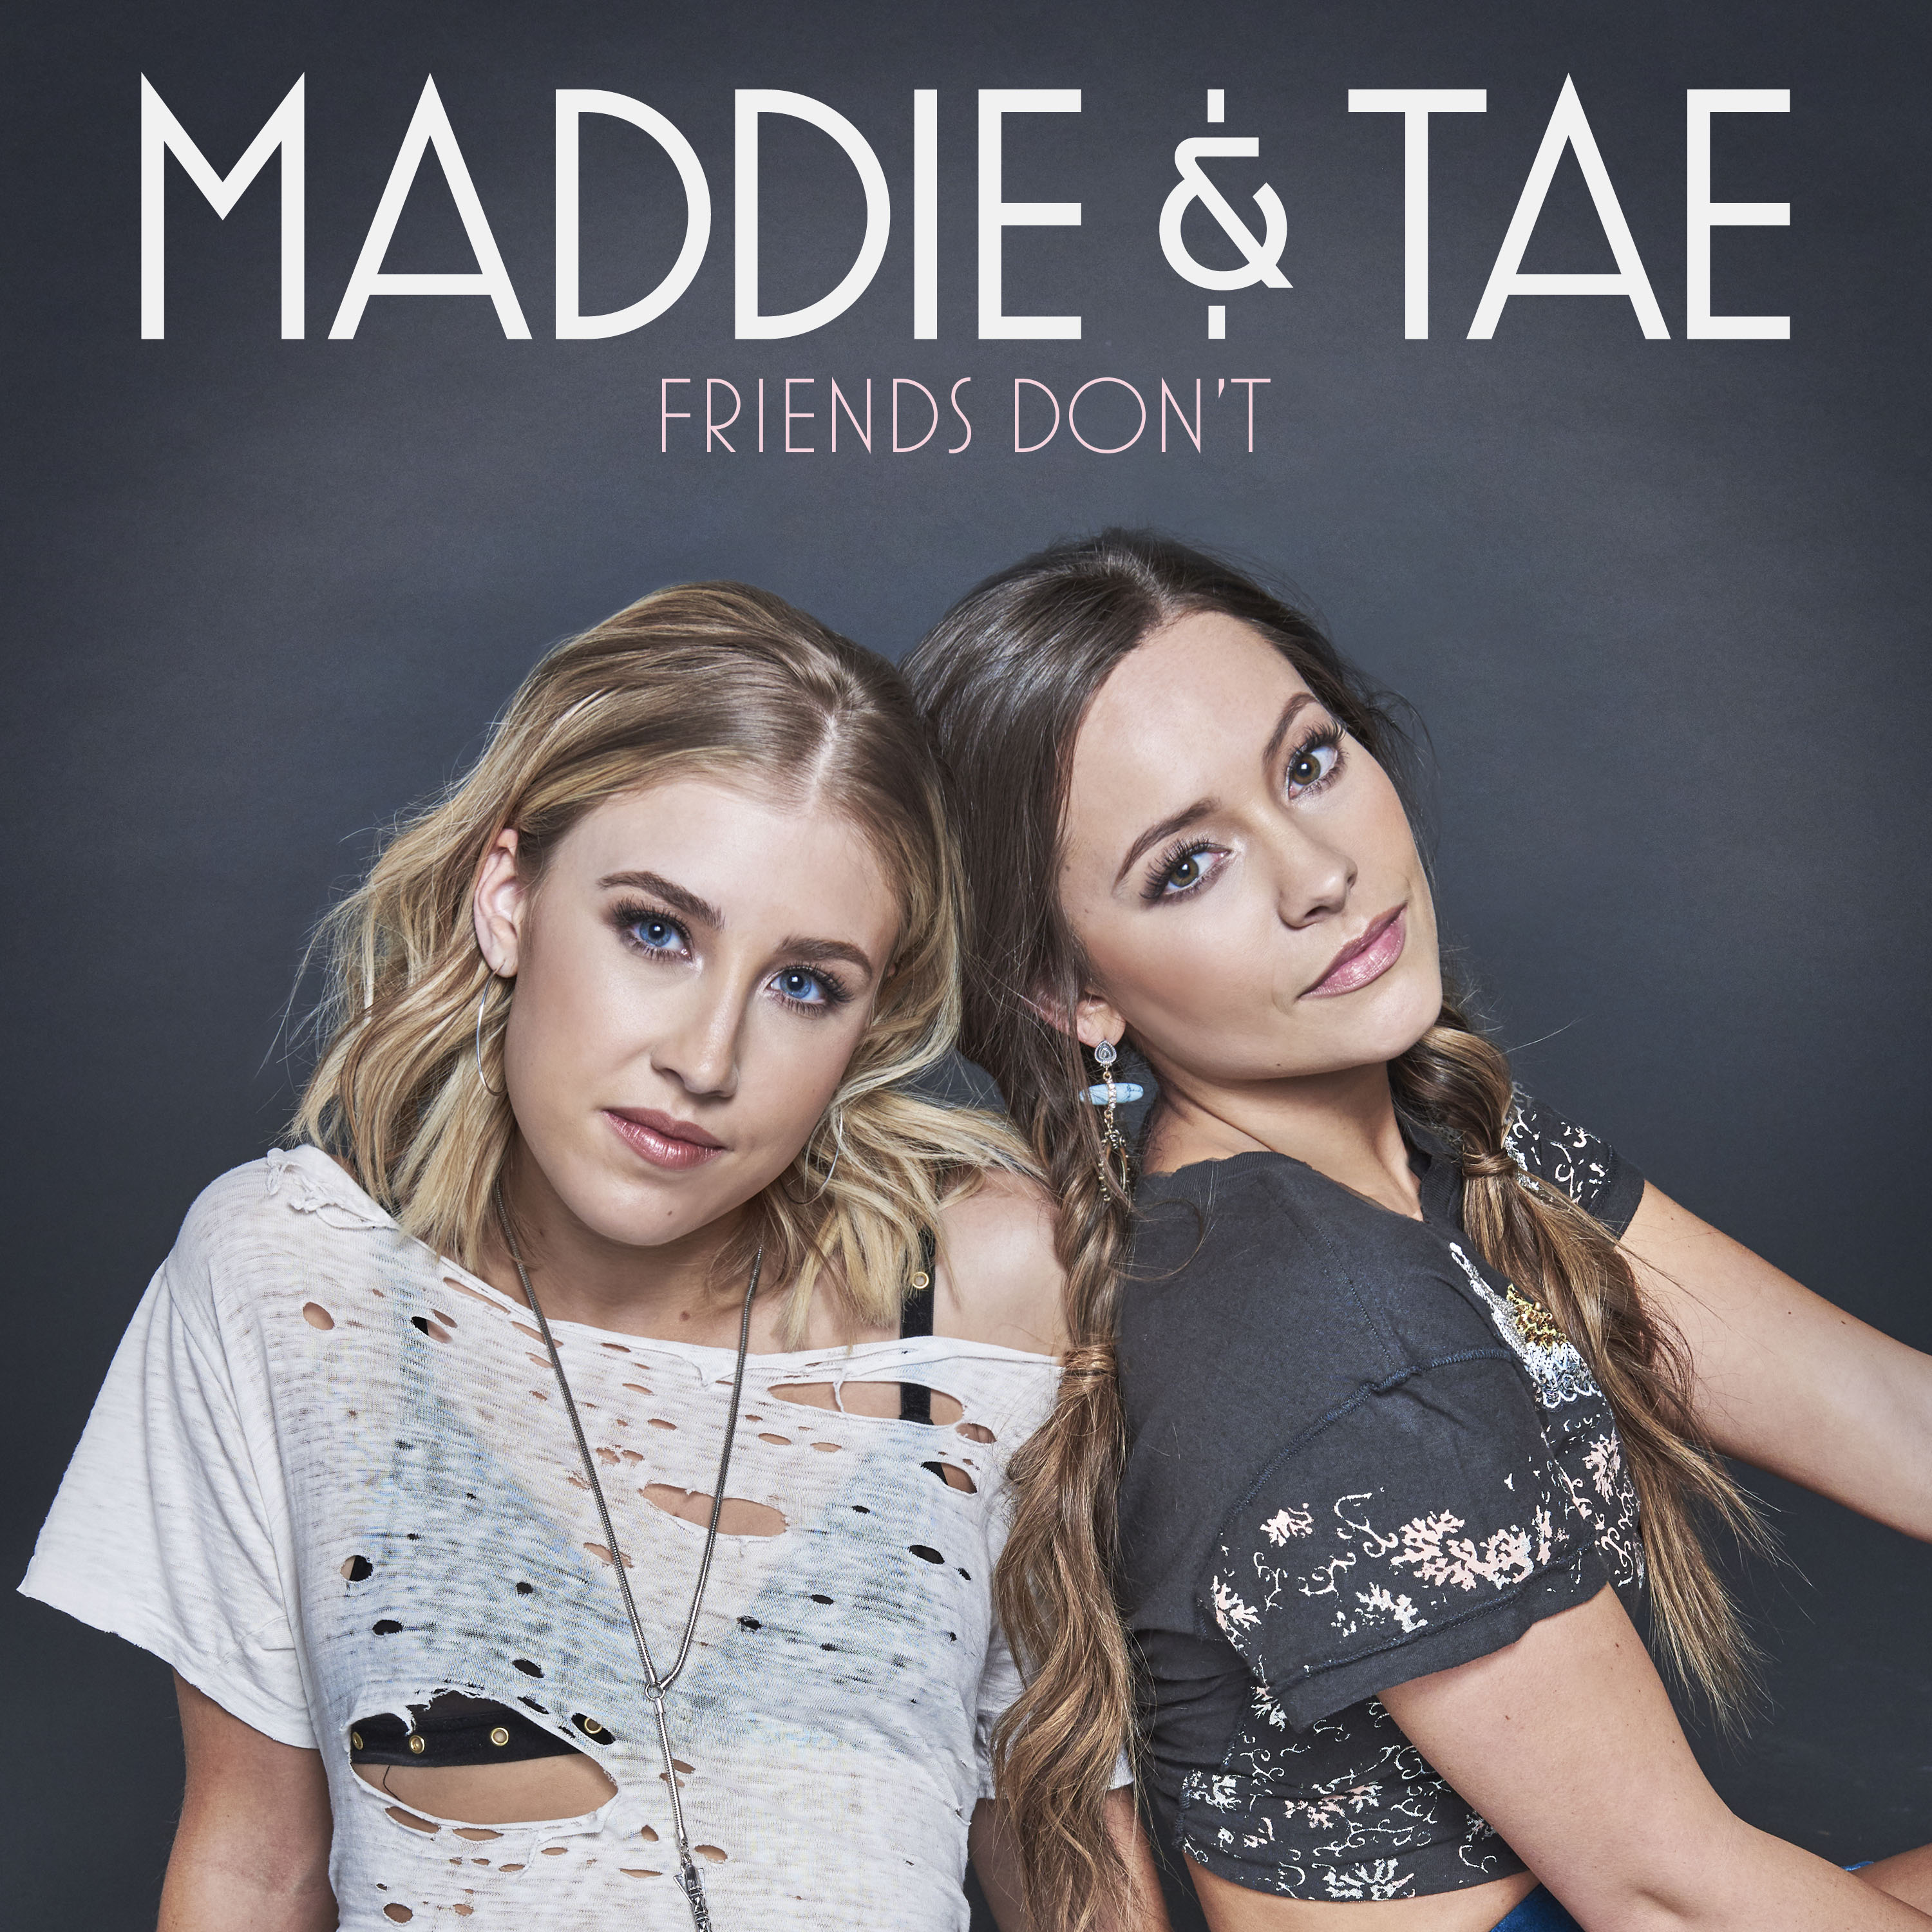 maddie & tae come back strong on "friends don"t"